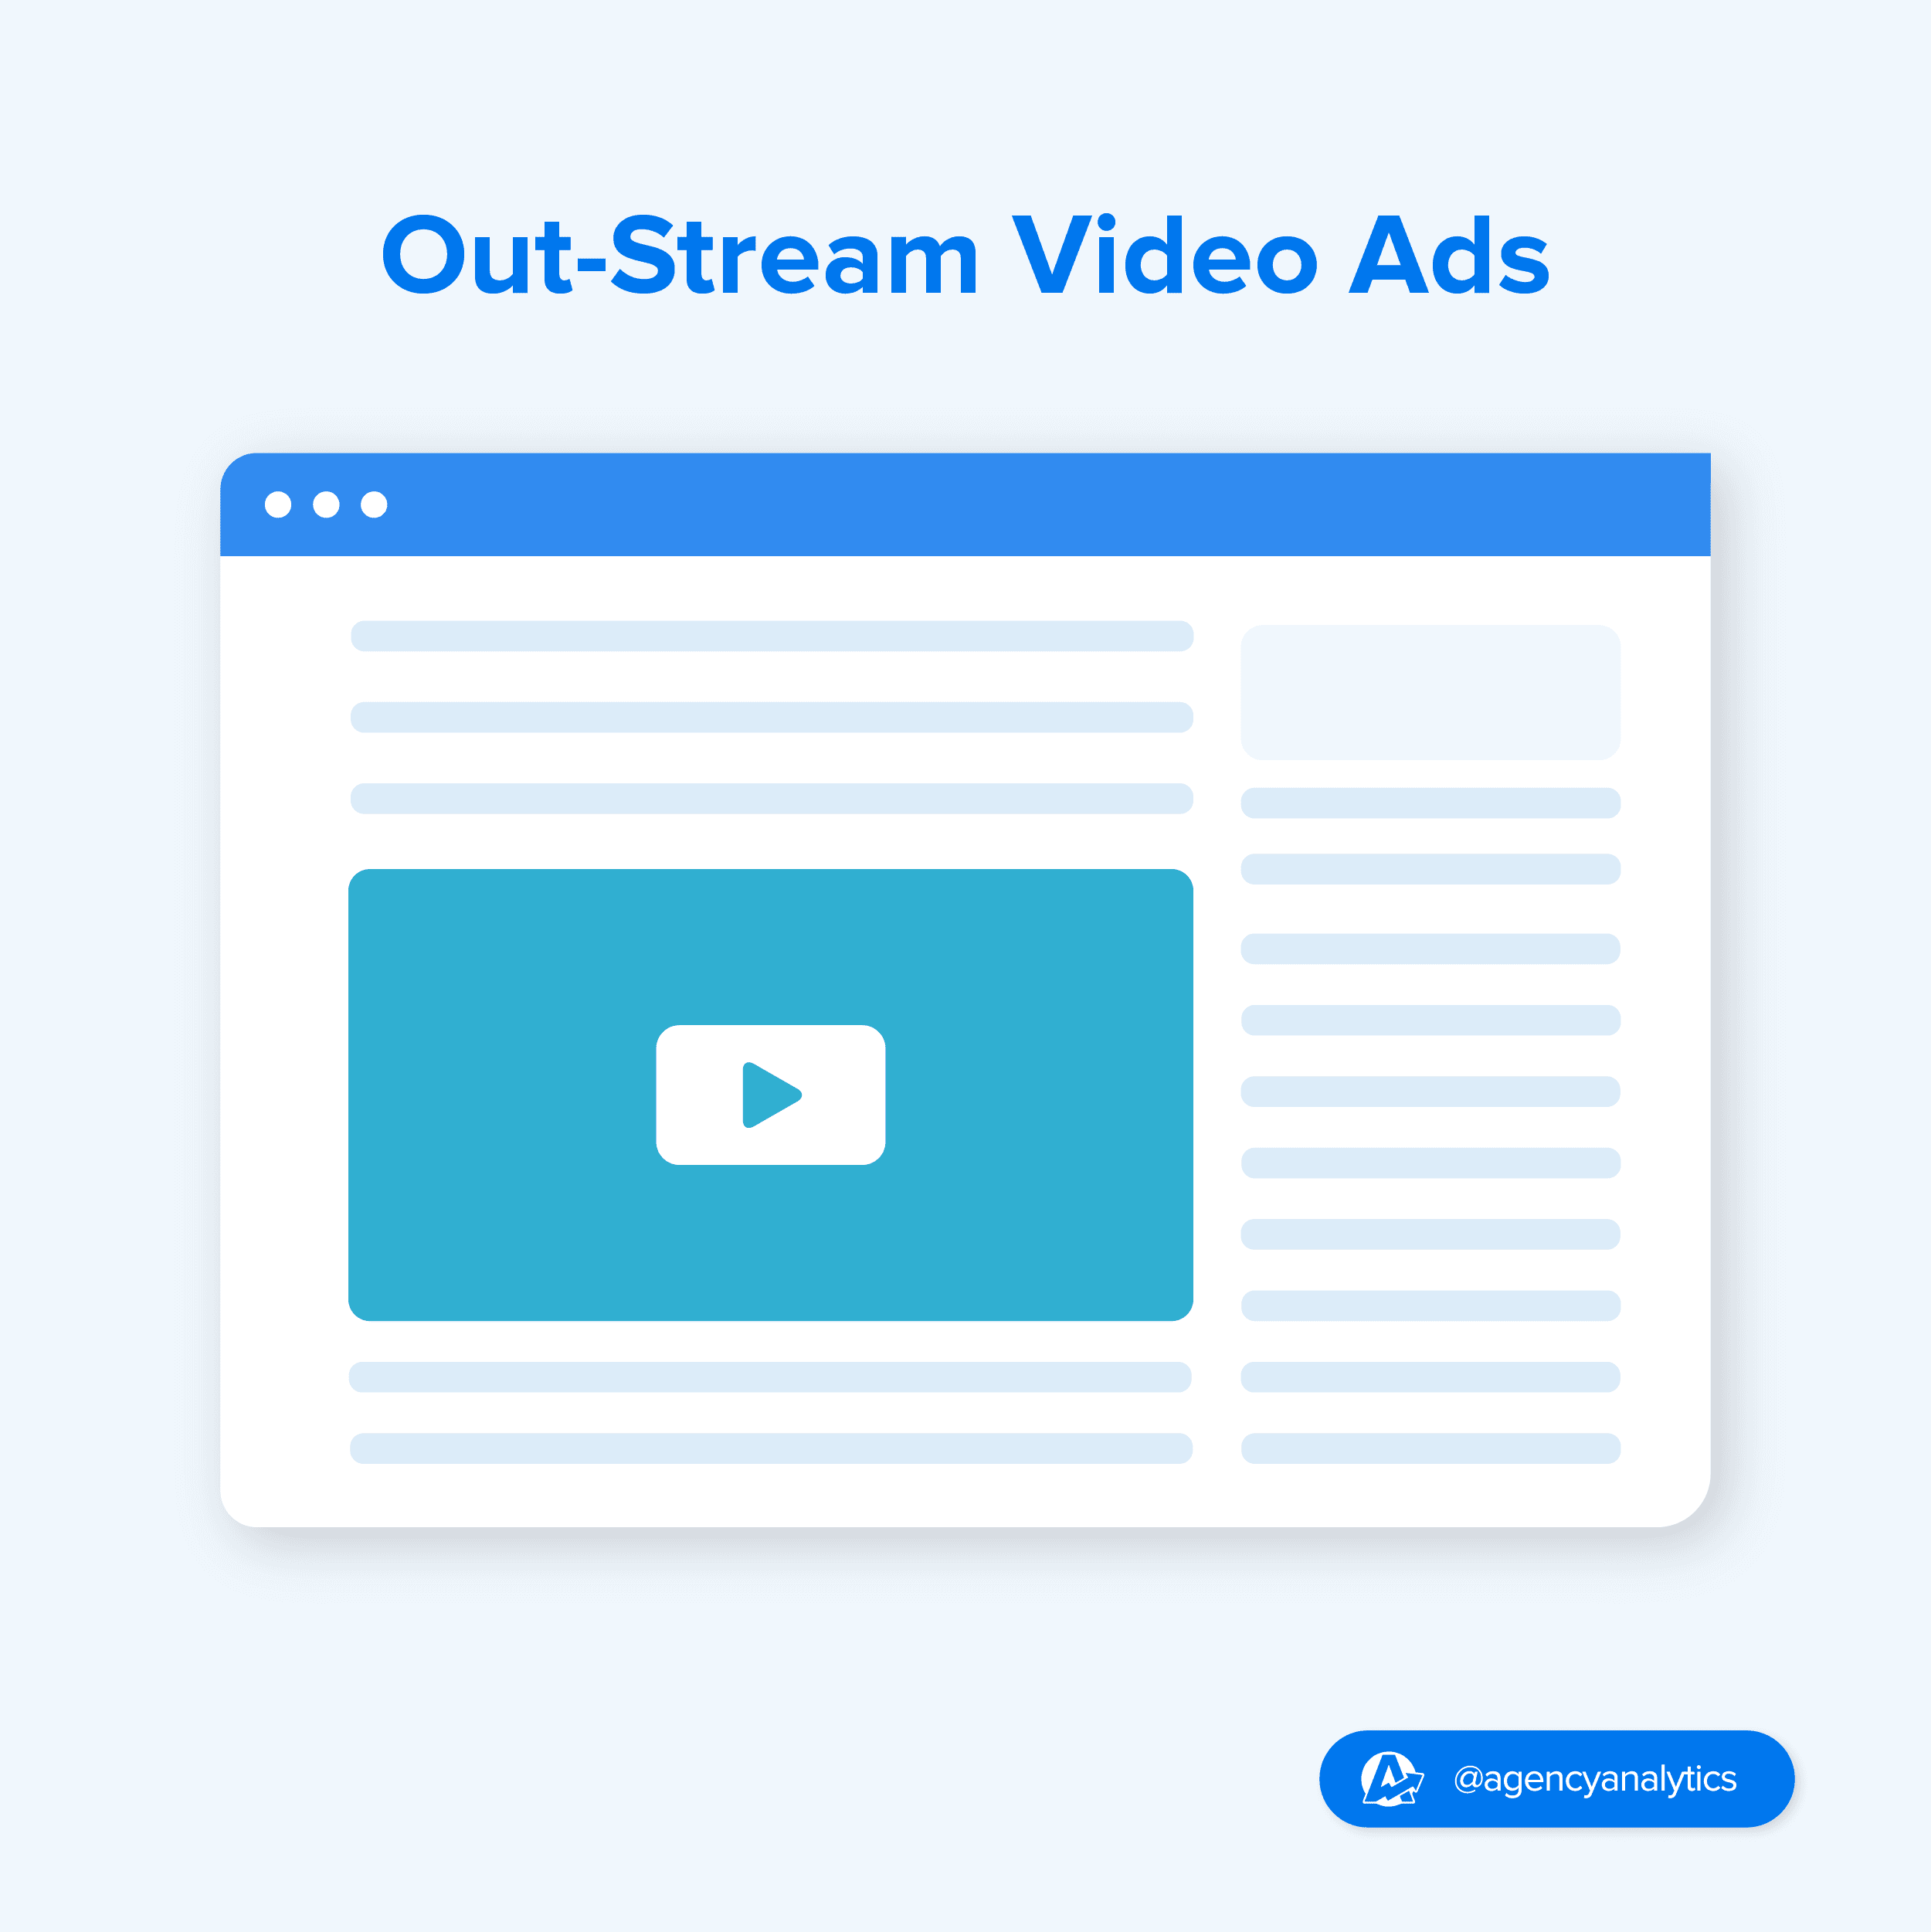 Illustration of Out-Stream Video Ads